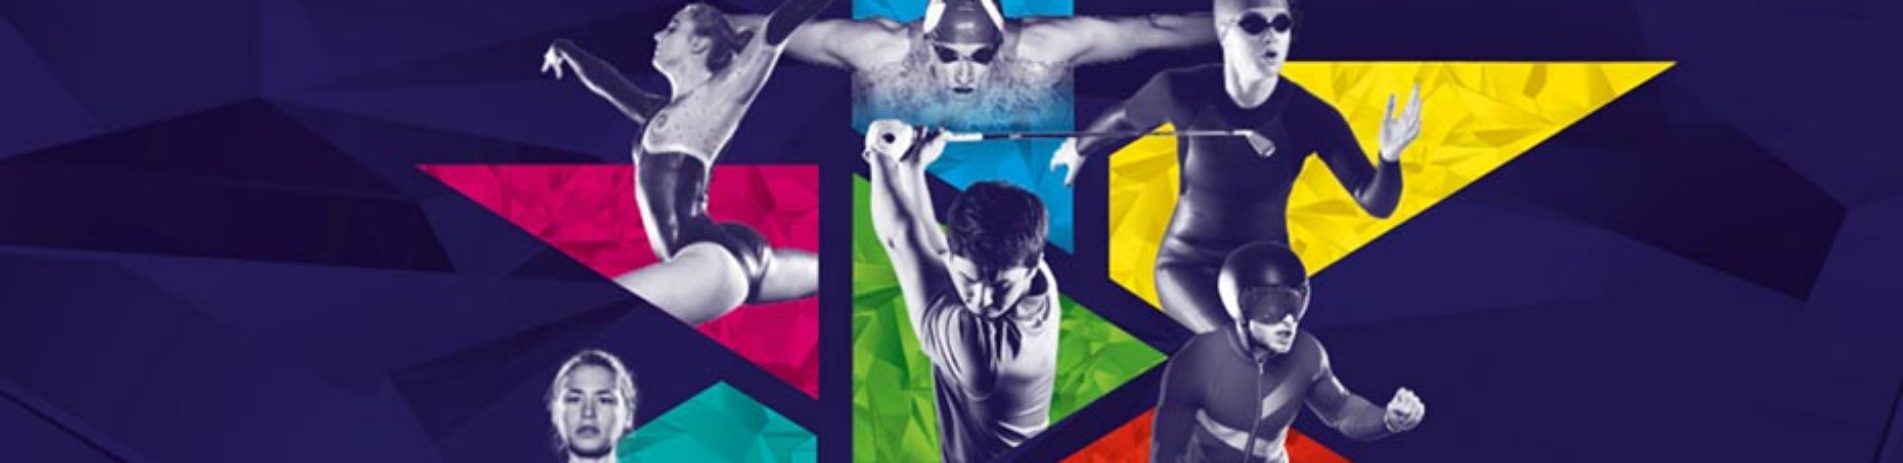 european-championships-glasgow-two-thousand-eighteen-logo-images-of-athletes-in-black-and-white-on-colourful-segments-of-star